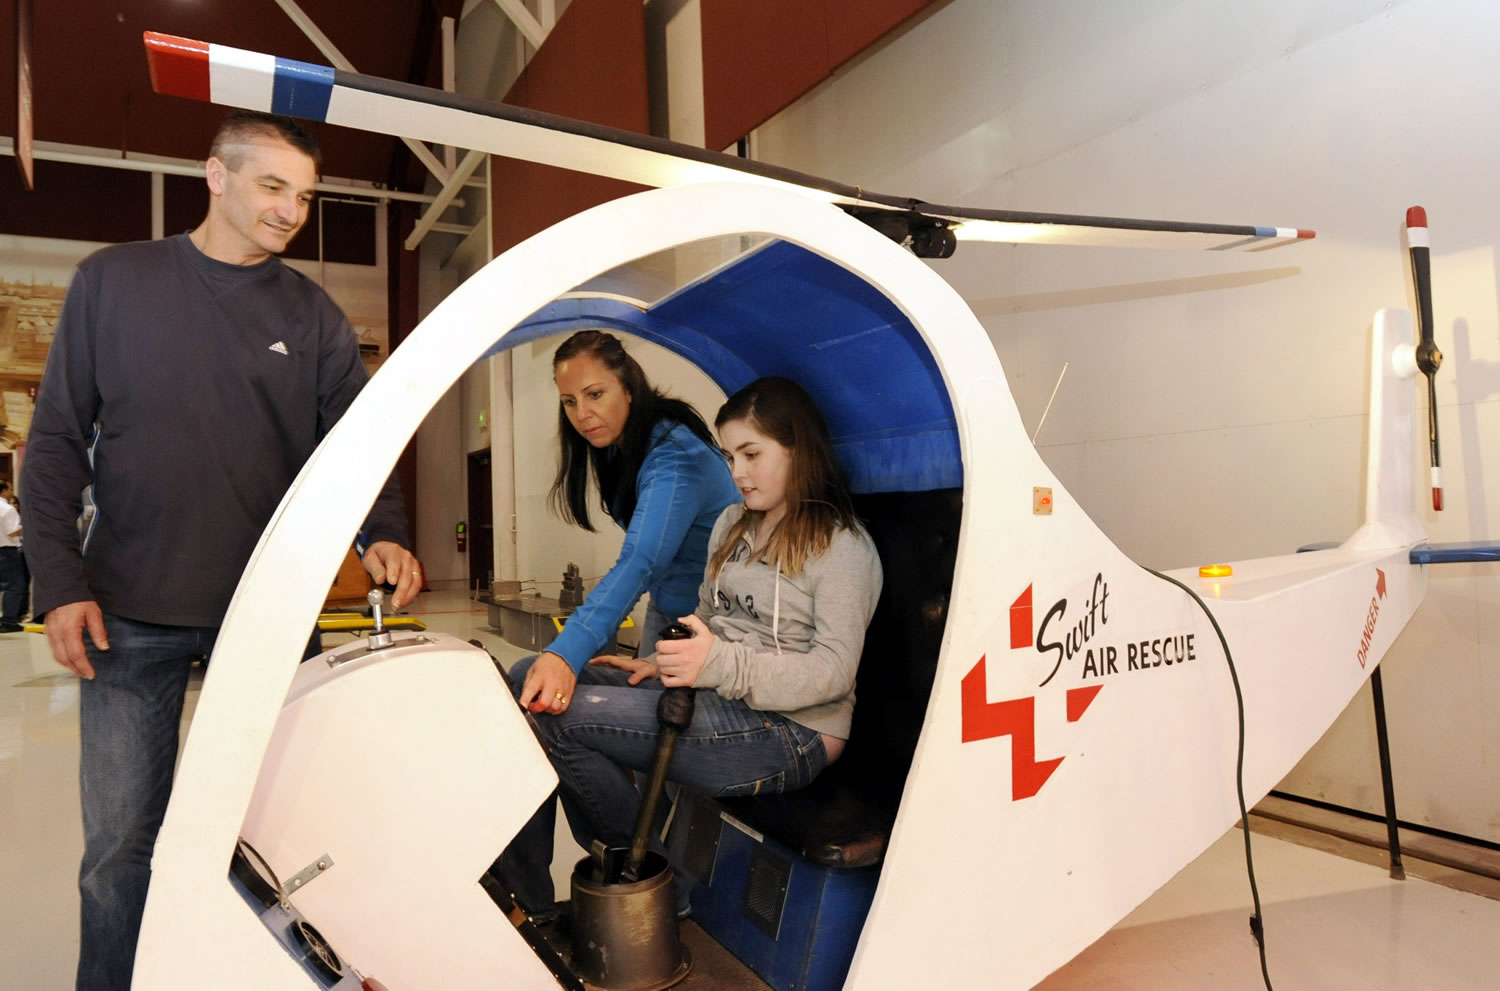 Victoria Quintero, seated, with her parents Tanya Quintero and Jaider Quintero, left, examines a hands-on helicopter display at Pearson Air Museum.